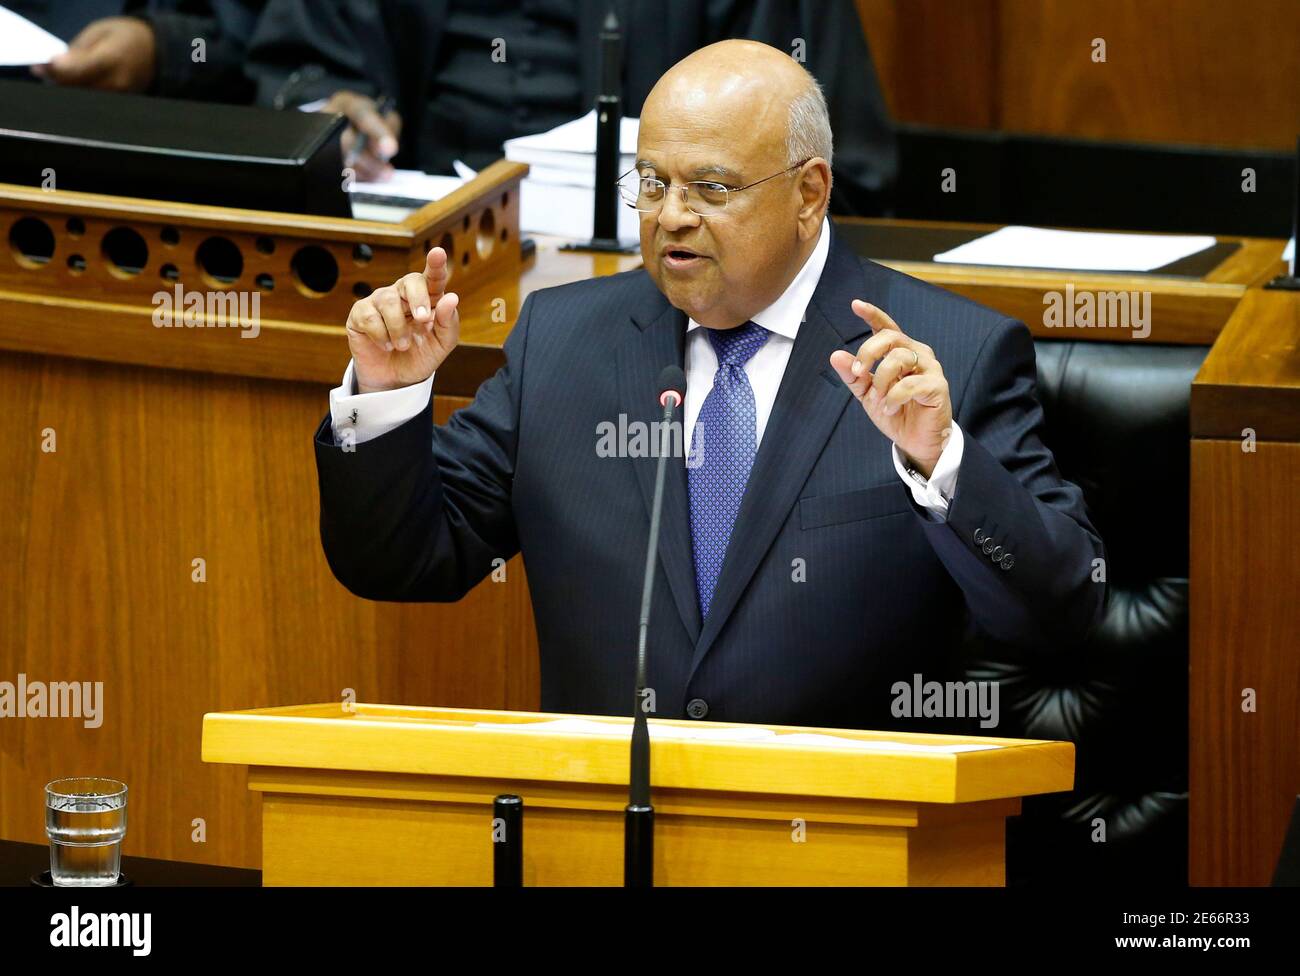 South Africa's Finance Minister Pravin Gordhan delivers his 2014 budget address in Parliament in Cape Town February 26, 2014. South Africa cut this year's growth forecast to 2.7 percent, saying deep challenges persisted after a 2009 recession and warning that delays to new infrastructure, especially in the power sector, posed risks to the continent's largest economy. REUTERS/Mike Hutchings (SOUTH AFRICA - Tags: POLITICS BUSINESS) Stock Photo